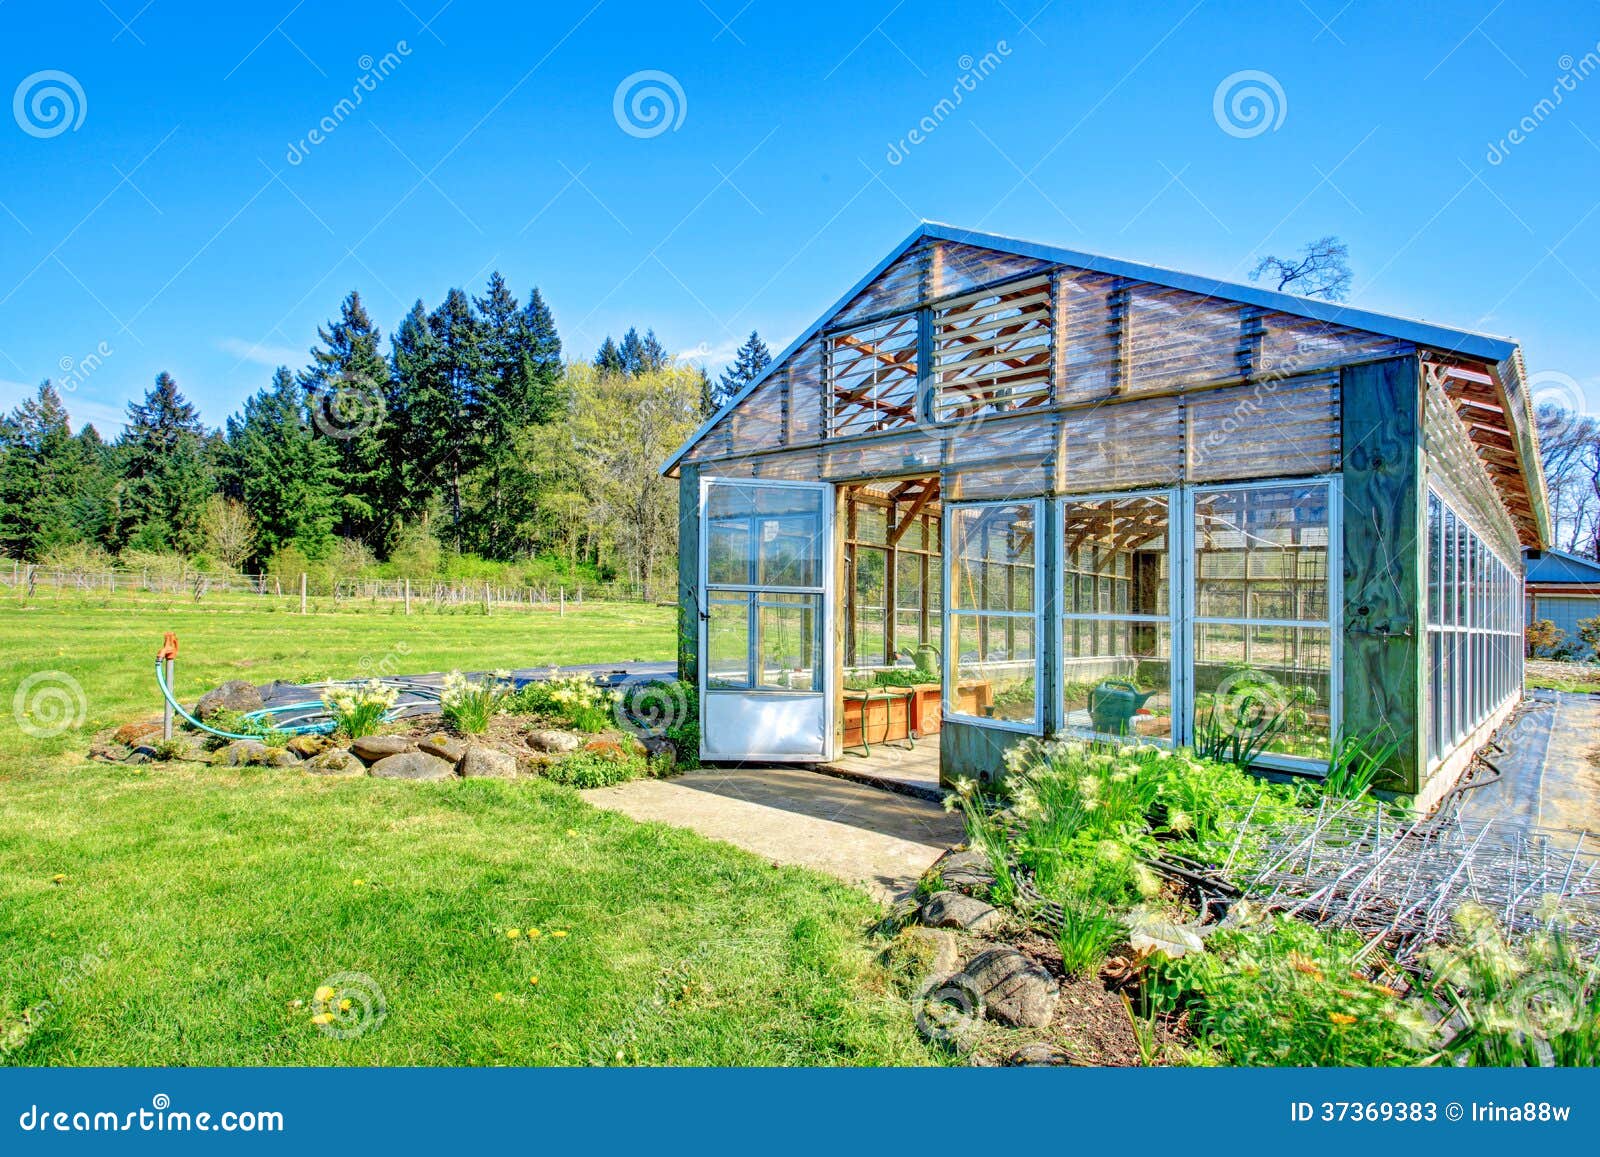 farm with greenhouse